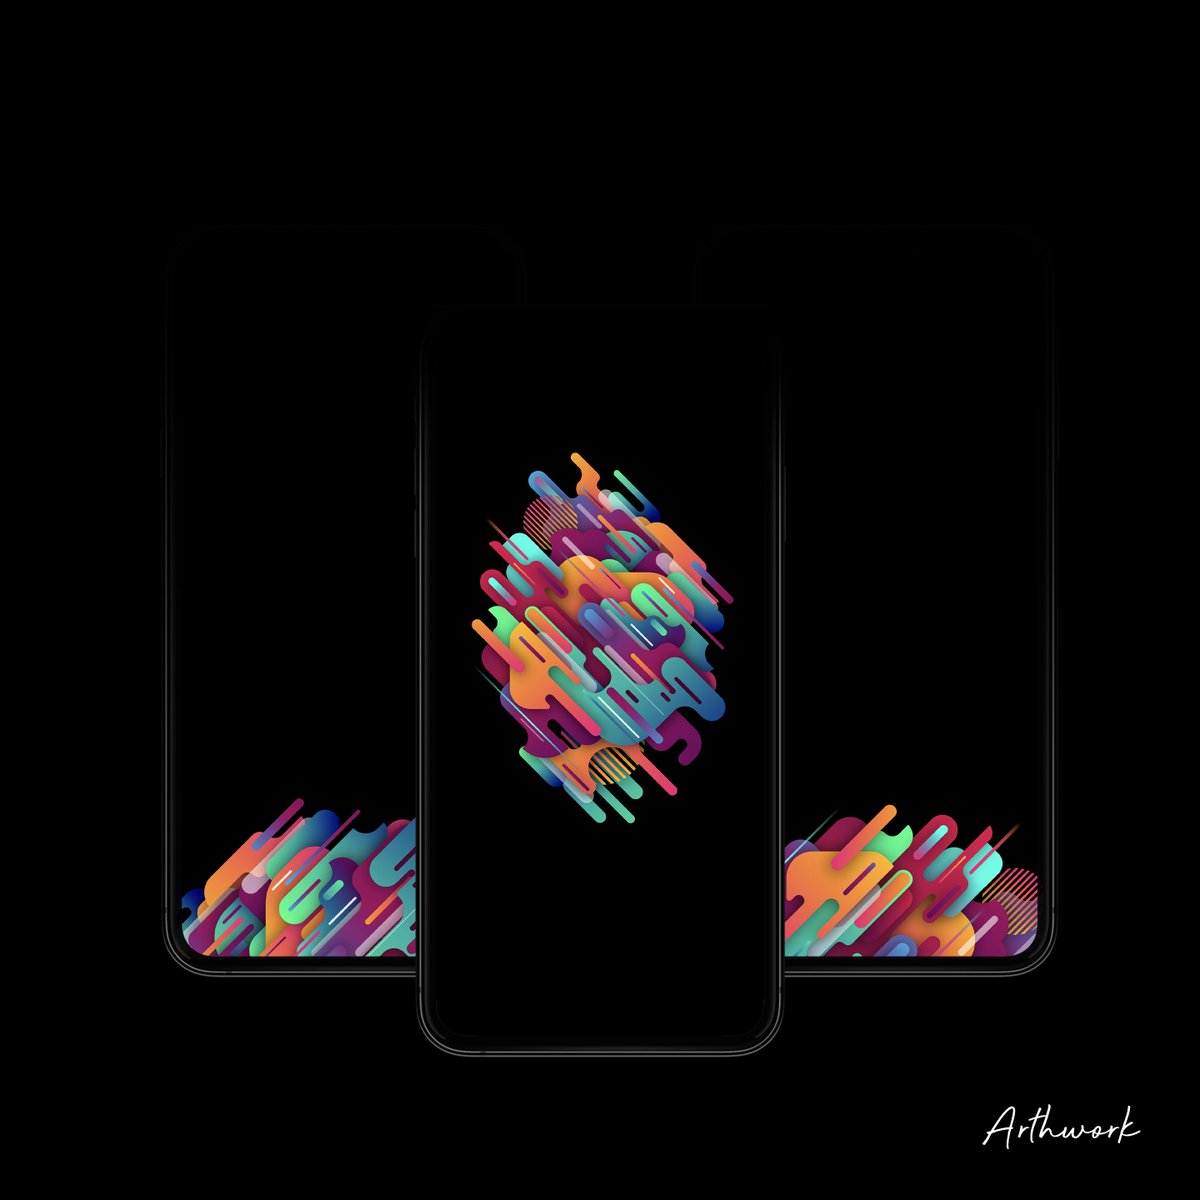 Like, Follow, RT 👌😎
New #amoledwallpapers
available for 🔽
- Any Android phone
- Iphone XS / XSMAX  /  X  /  XR
Prod by @Arthur1992aS
Download⬇️
drive.google.com/drive/folders/…
All my other wallpapers in one Place 🔽
docs.google.com/document/d/1a2…